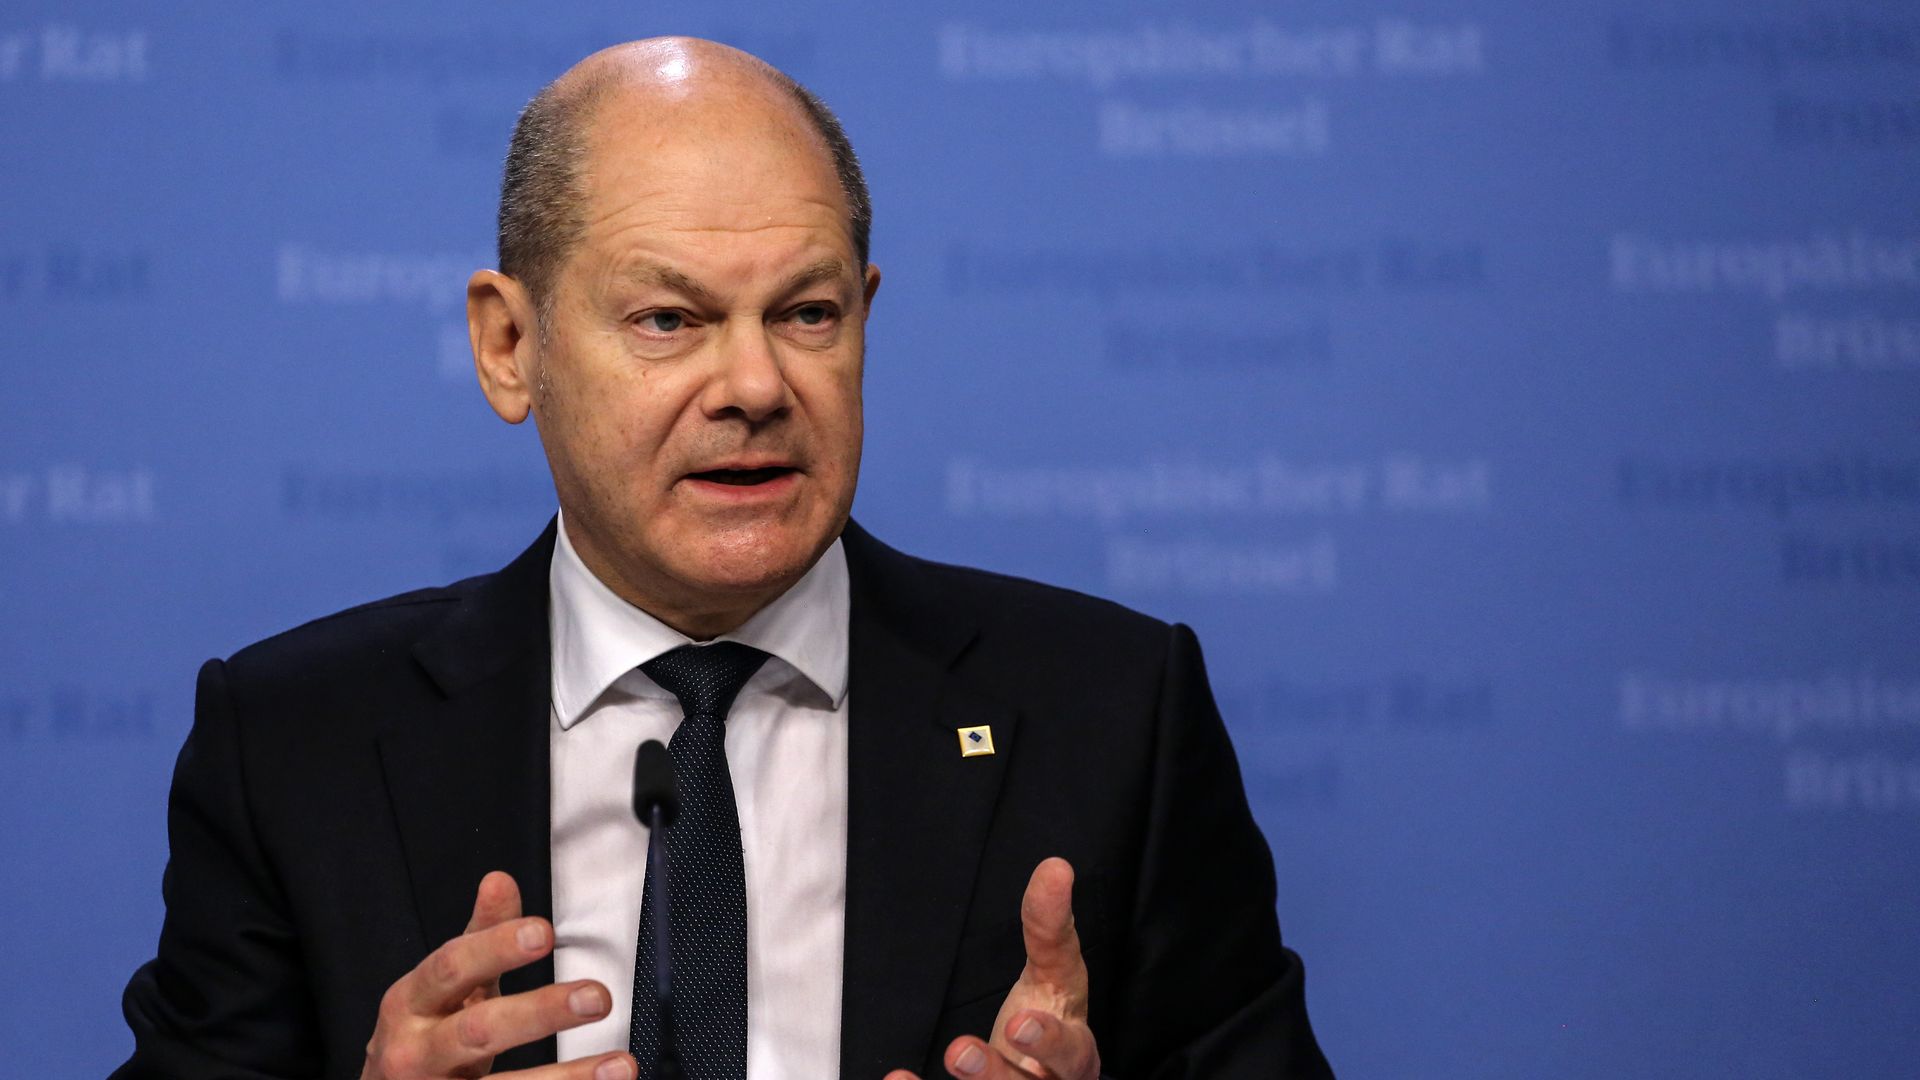 German Chancellor Olaf Scholz speaks at the European Council headquarters in Brussels.